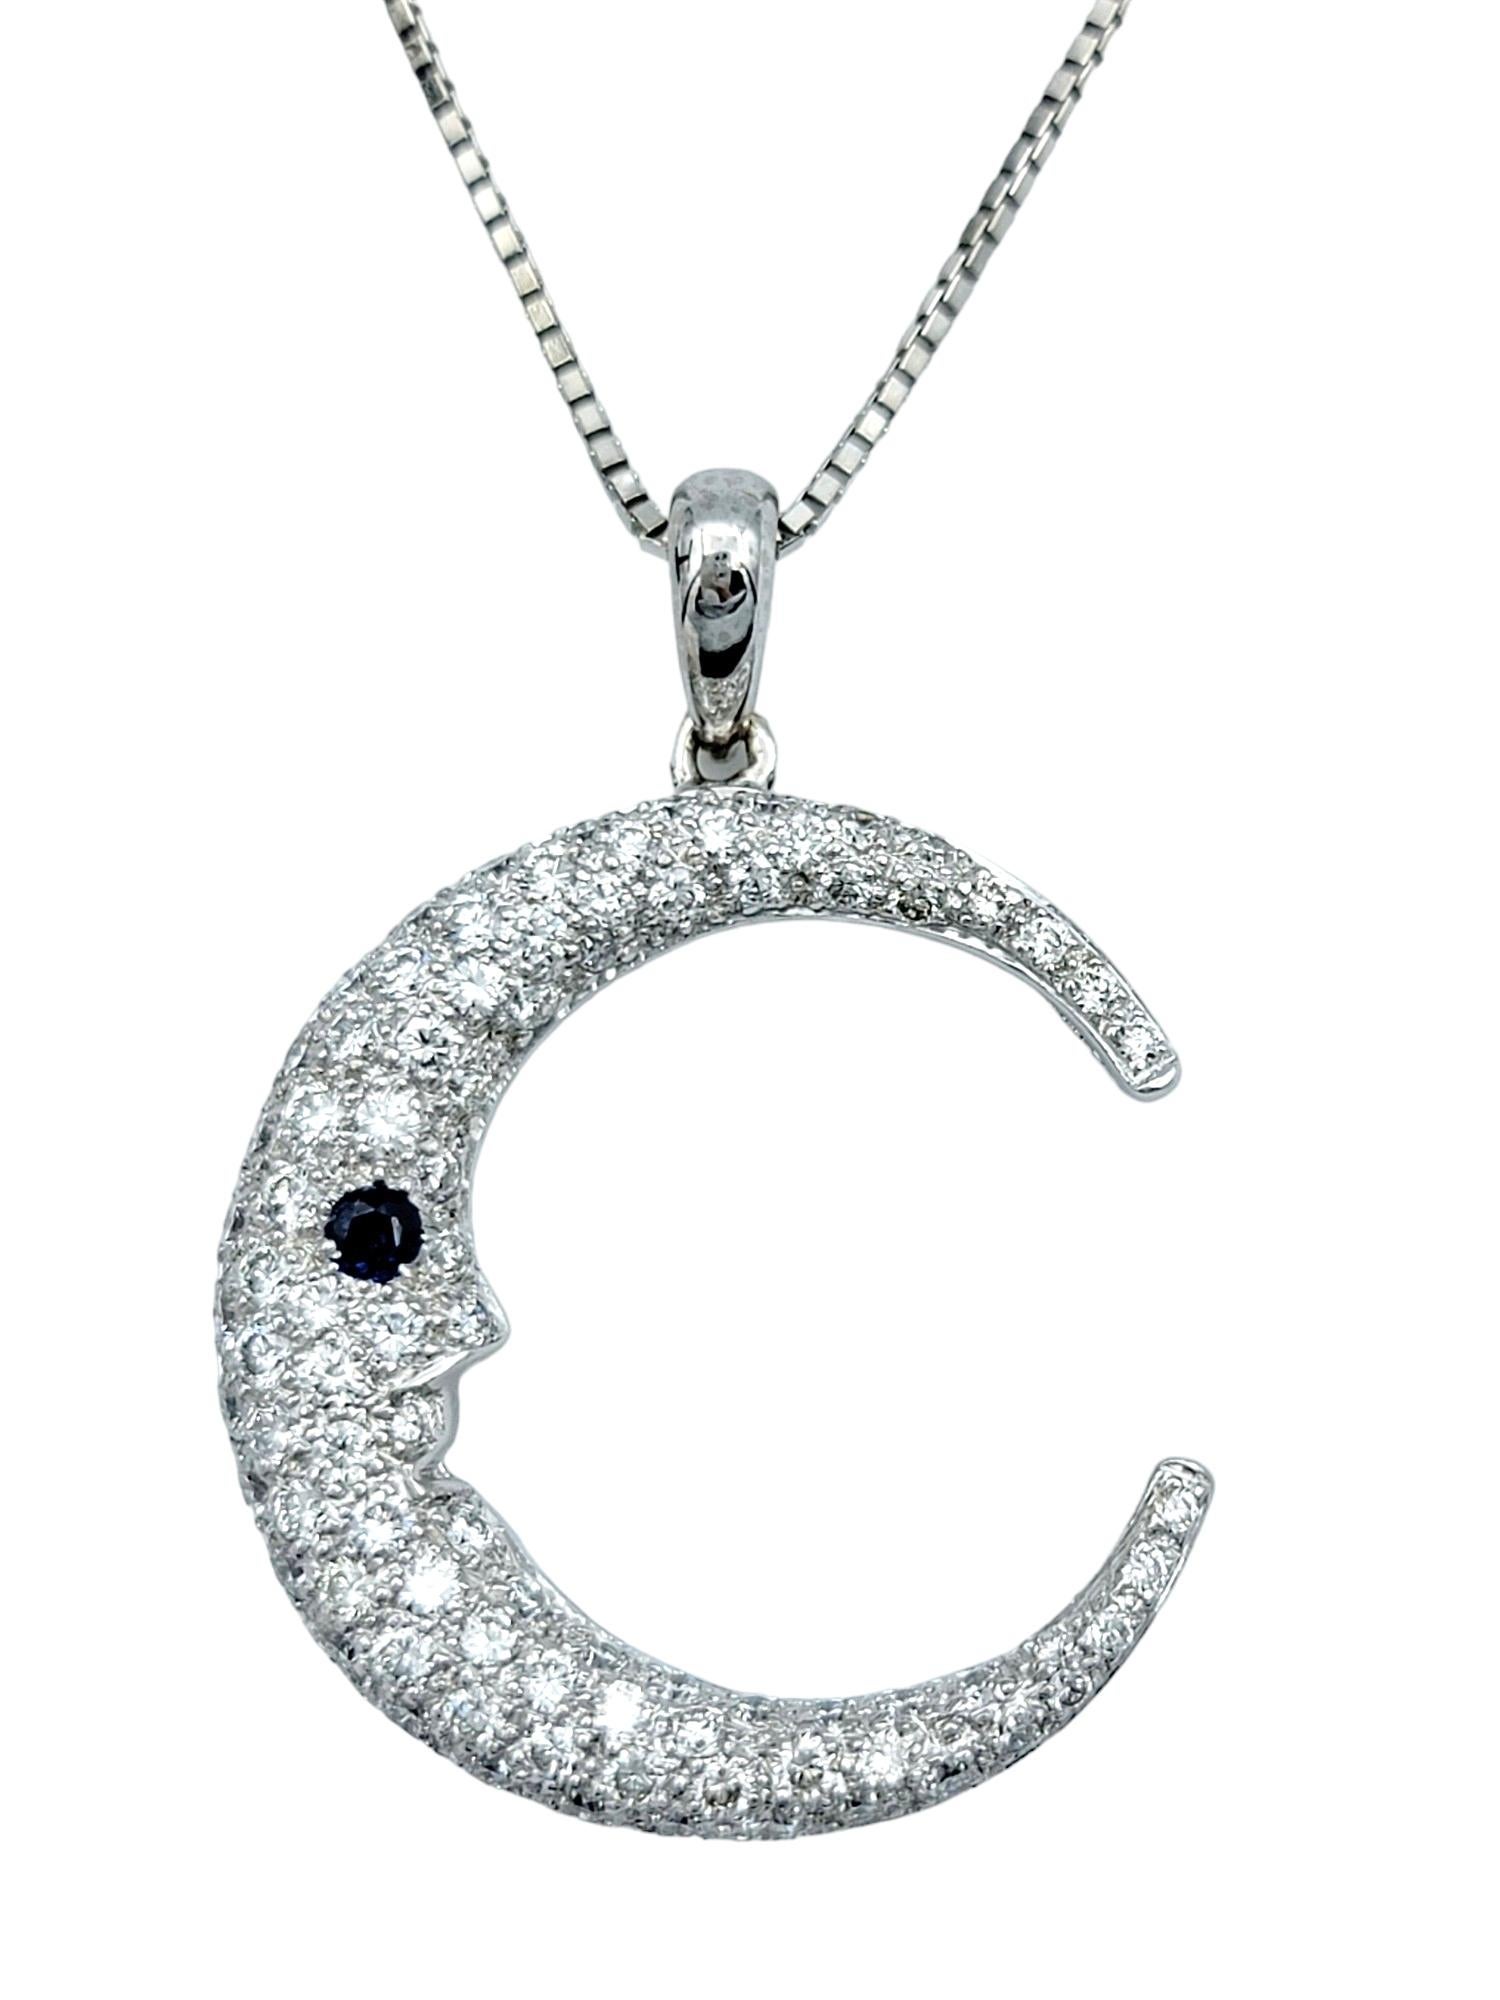 This crescent moon pendant necklace exudes celestial charm with its shimmering diamond pave design set in 14 karat white gold. The delicate curves of the moon are adorned with sparkling diamonds, creating a captivating celestial silhouette.

Adding